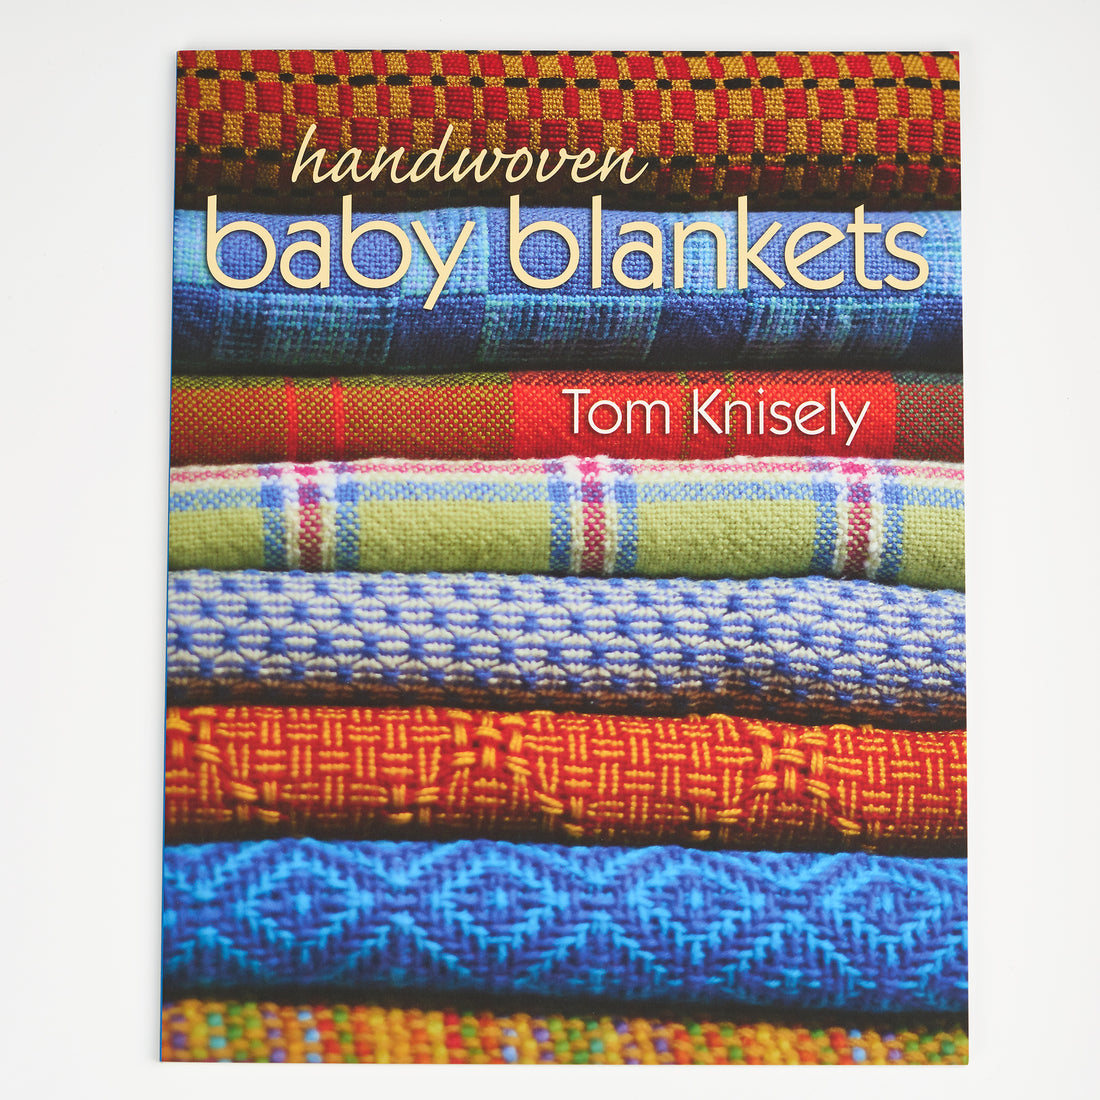 Handwoven baby blankets par Tom Knisely - Anglais